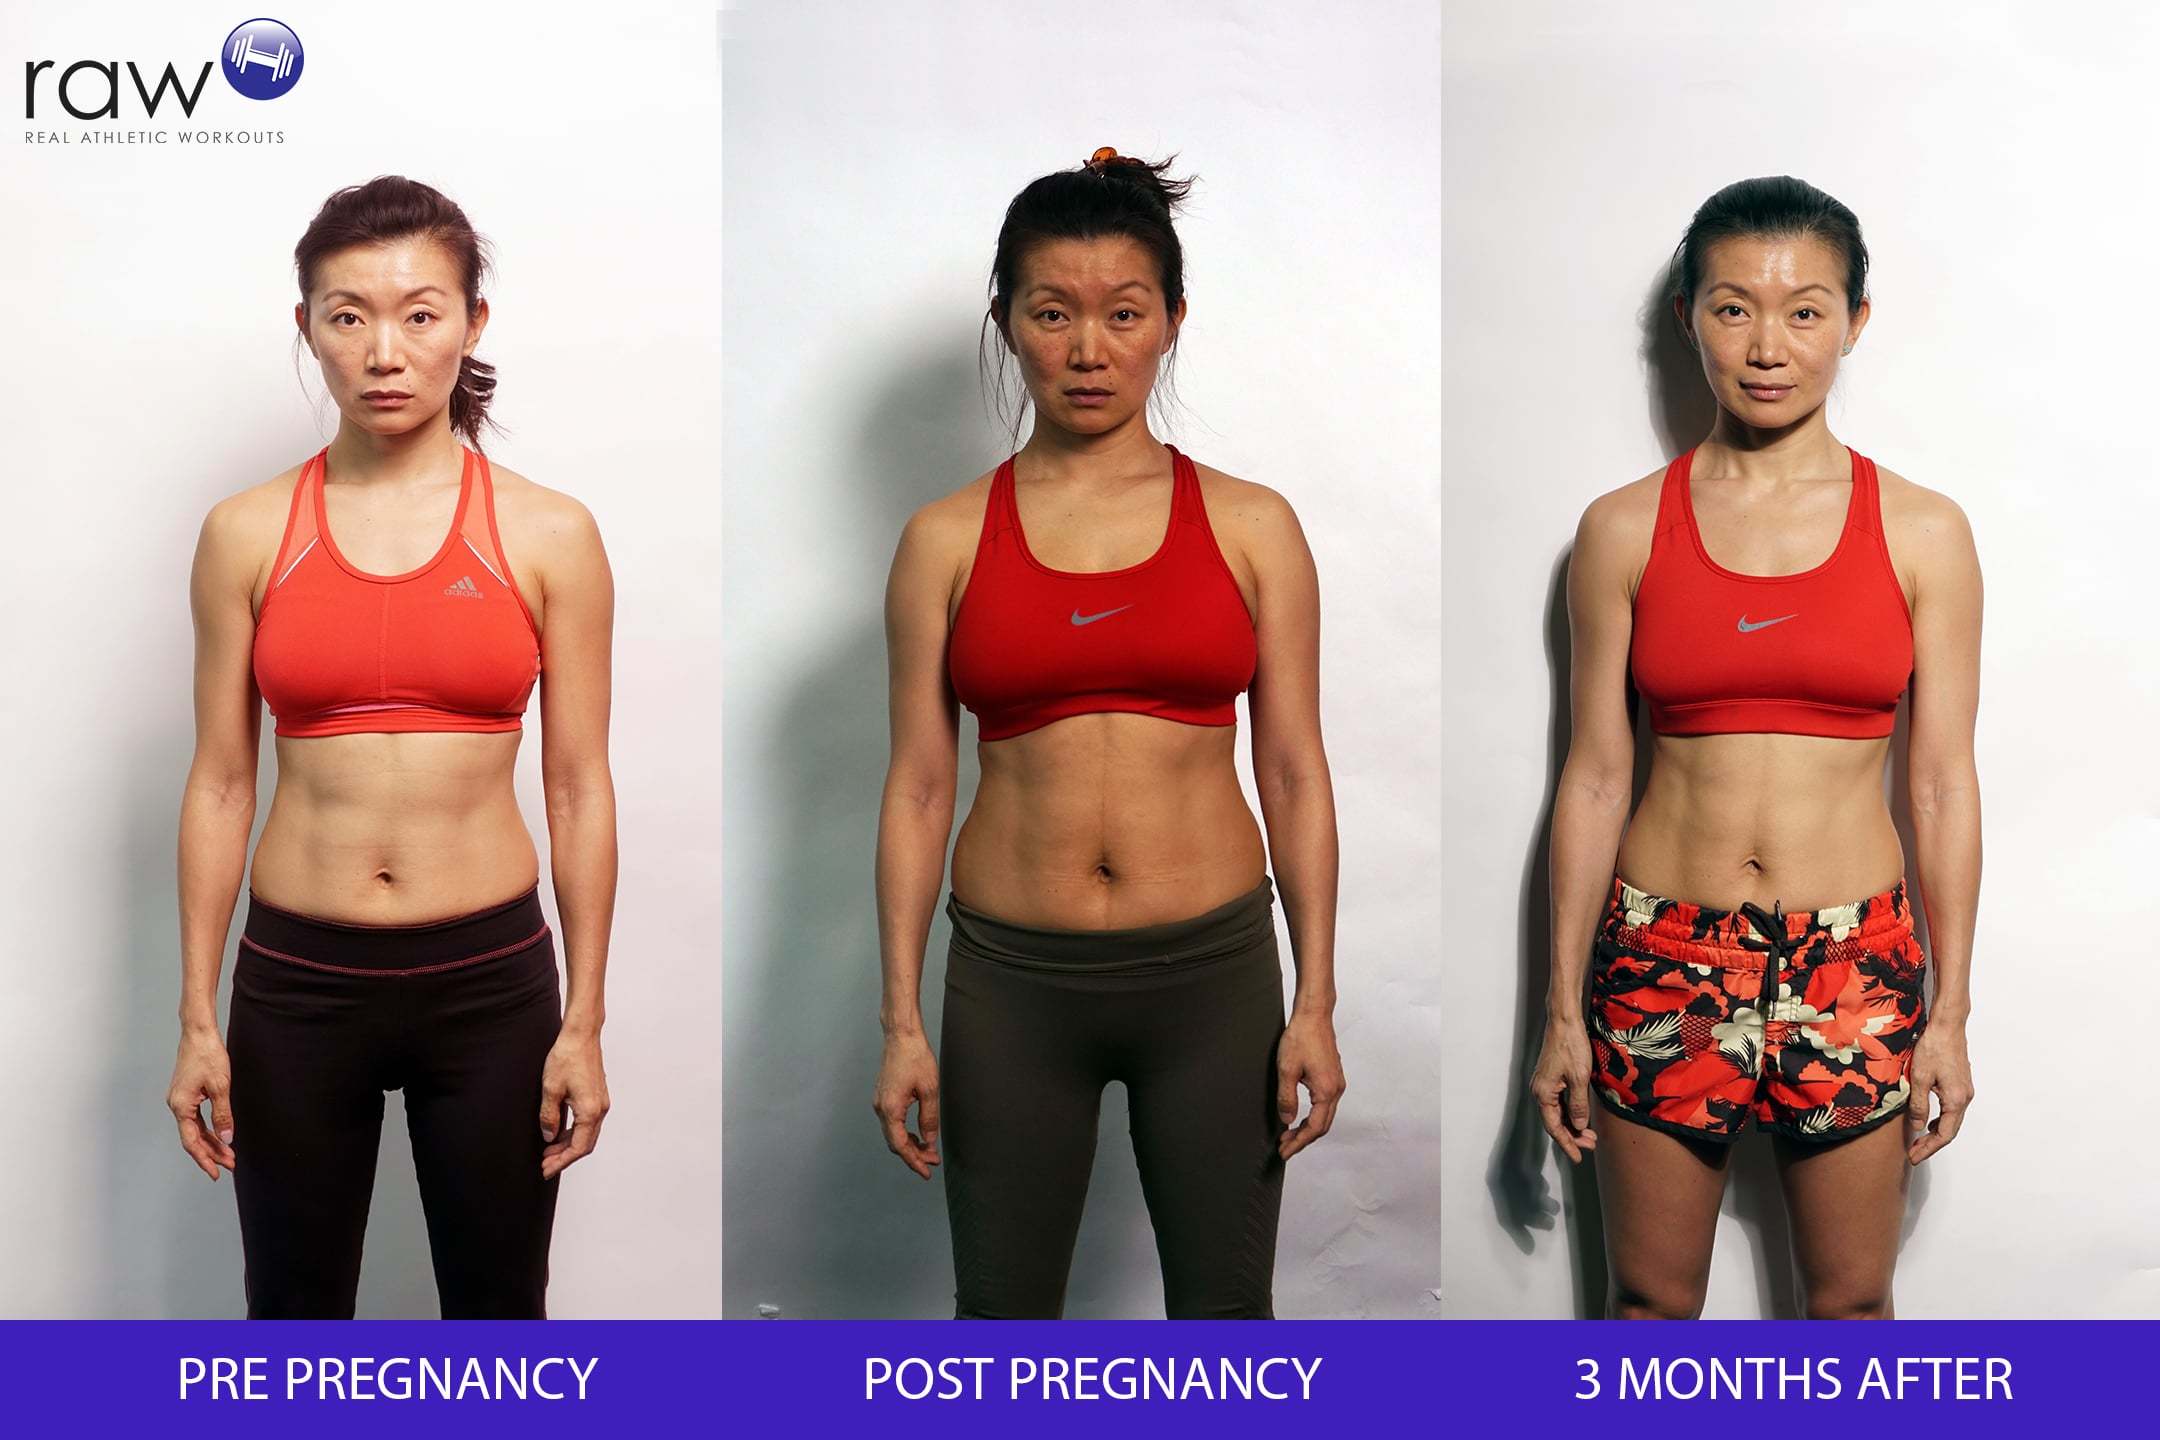 New Mum Loses Post Pregnancy Weight - RAW Personal Training